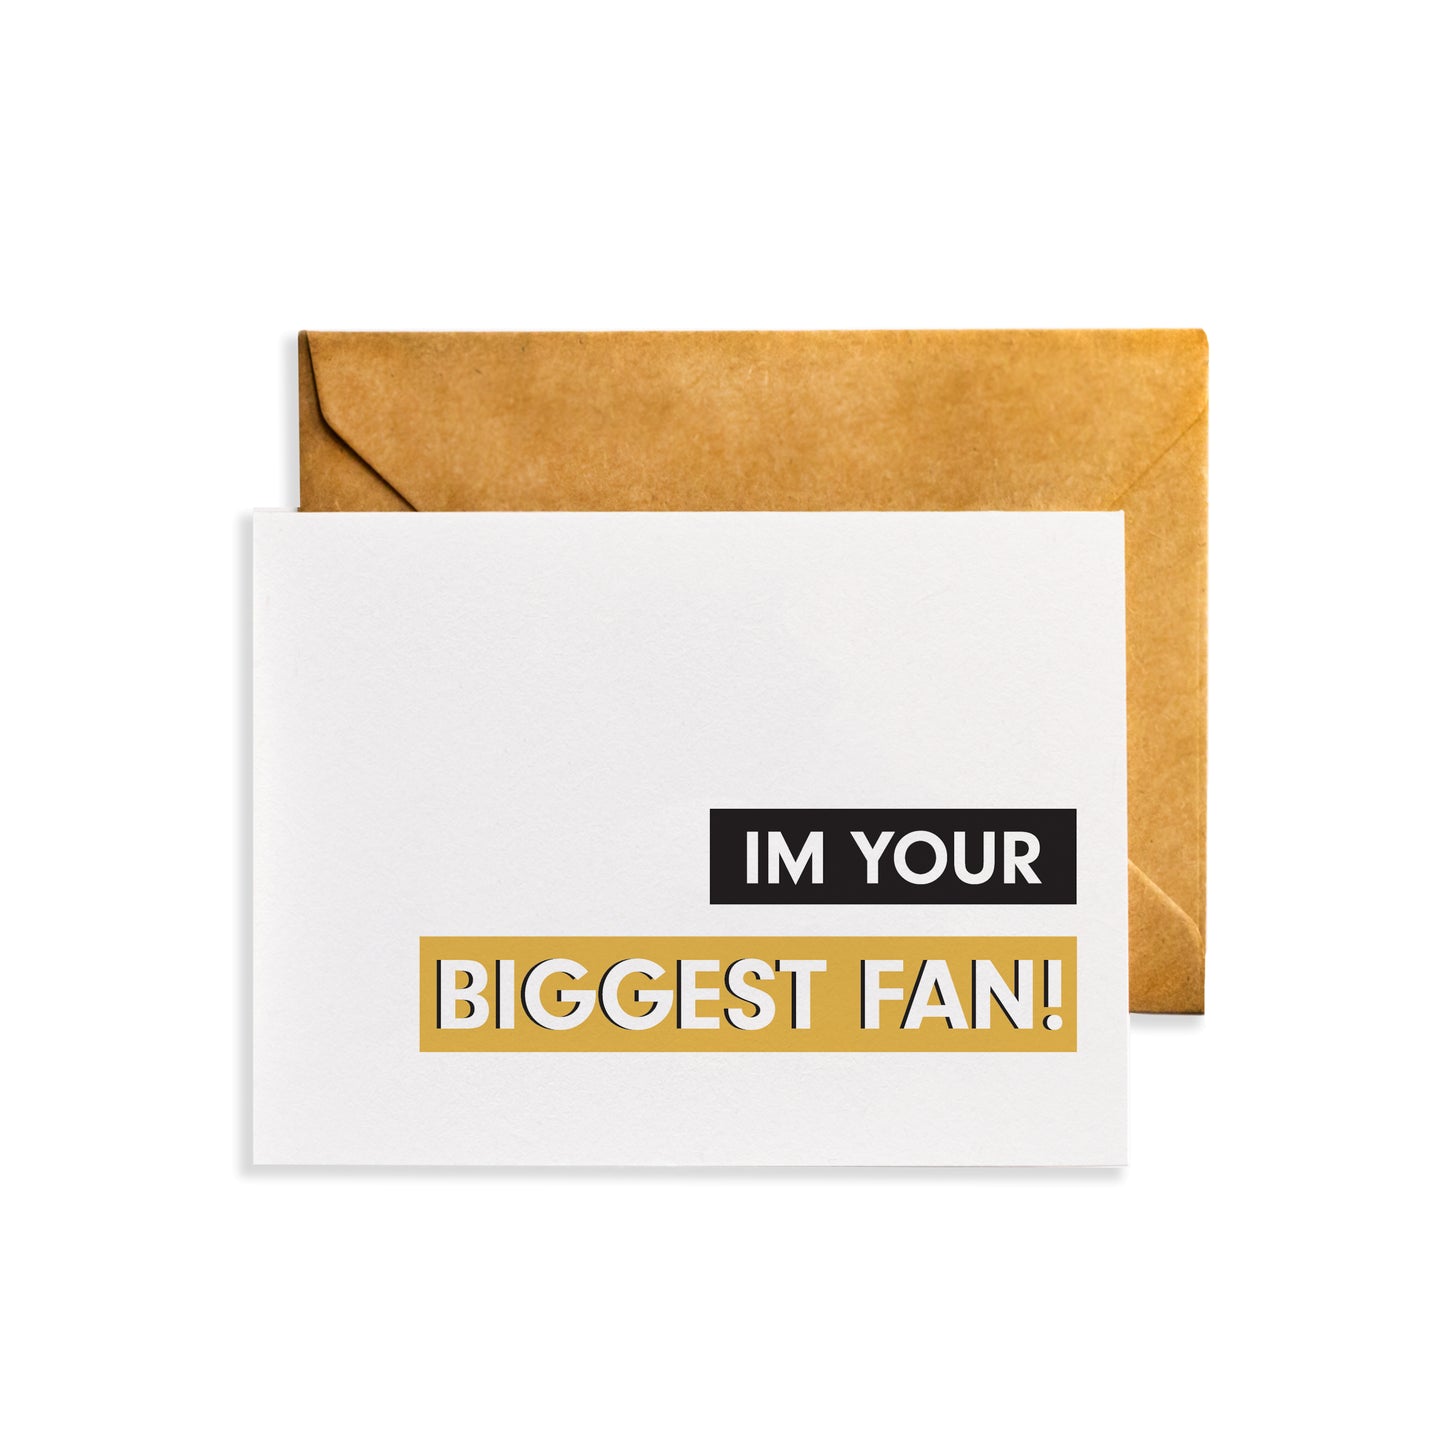 I'm Your Biggest Fan - Encouragement Congratulations Greeting Card with Envelope